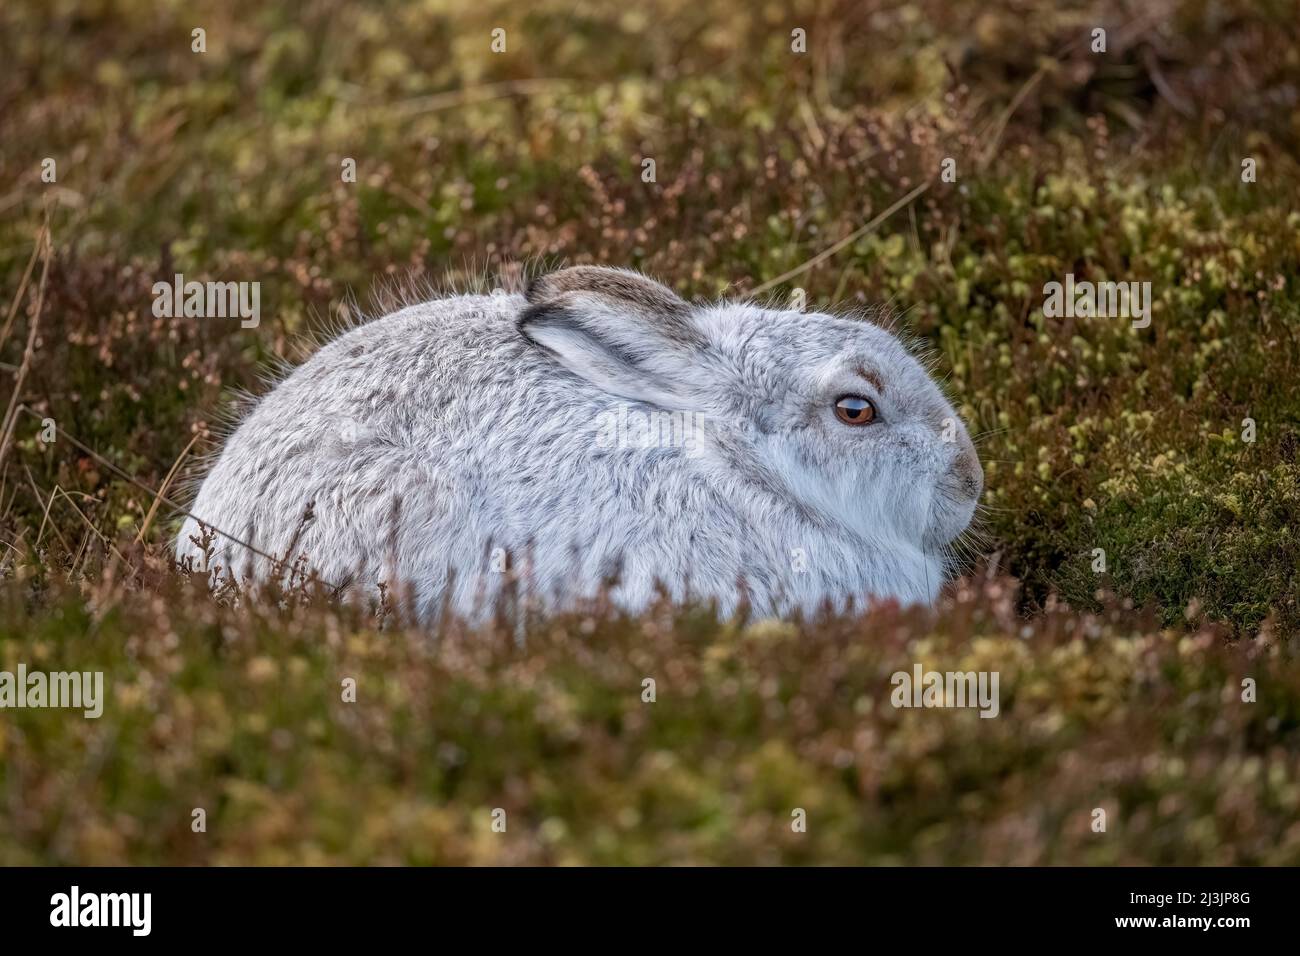 Mountain hare, close up, in the heather on a hillside in the winter time Stock Photo